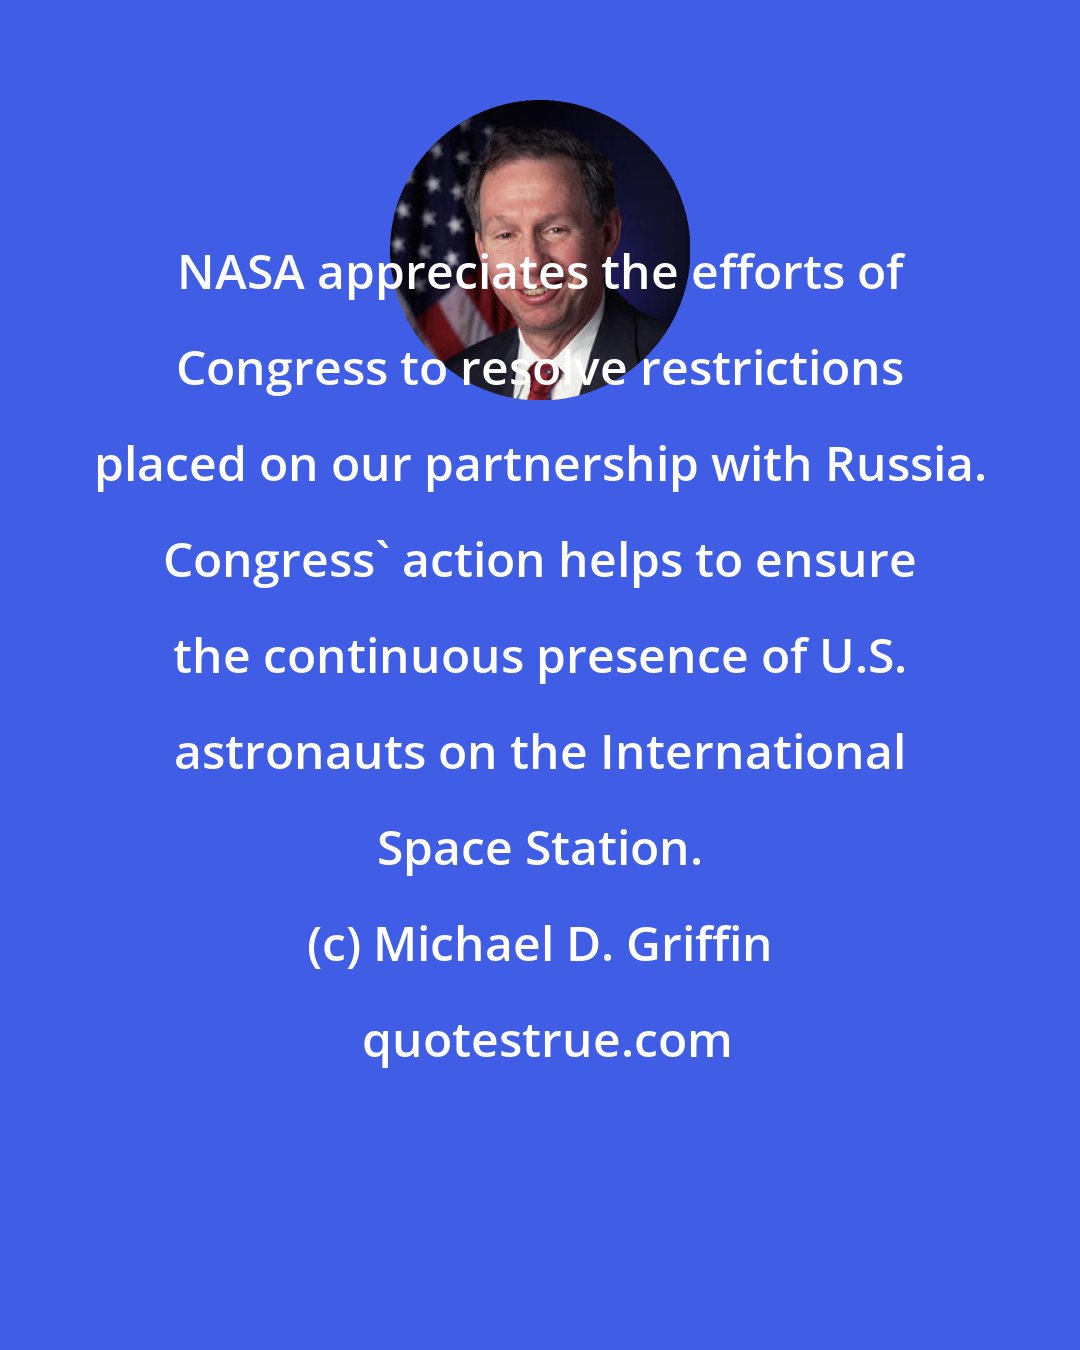 Michael D. Griffin: NASA appreciates the efforts of Congress to resolve restrictions placed on our partnership with Russia. Congress' action helps to ensure the continuous presence of U.S. astronauts on the International Space Station.